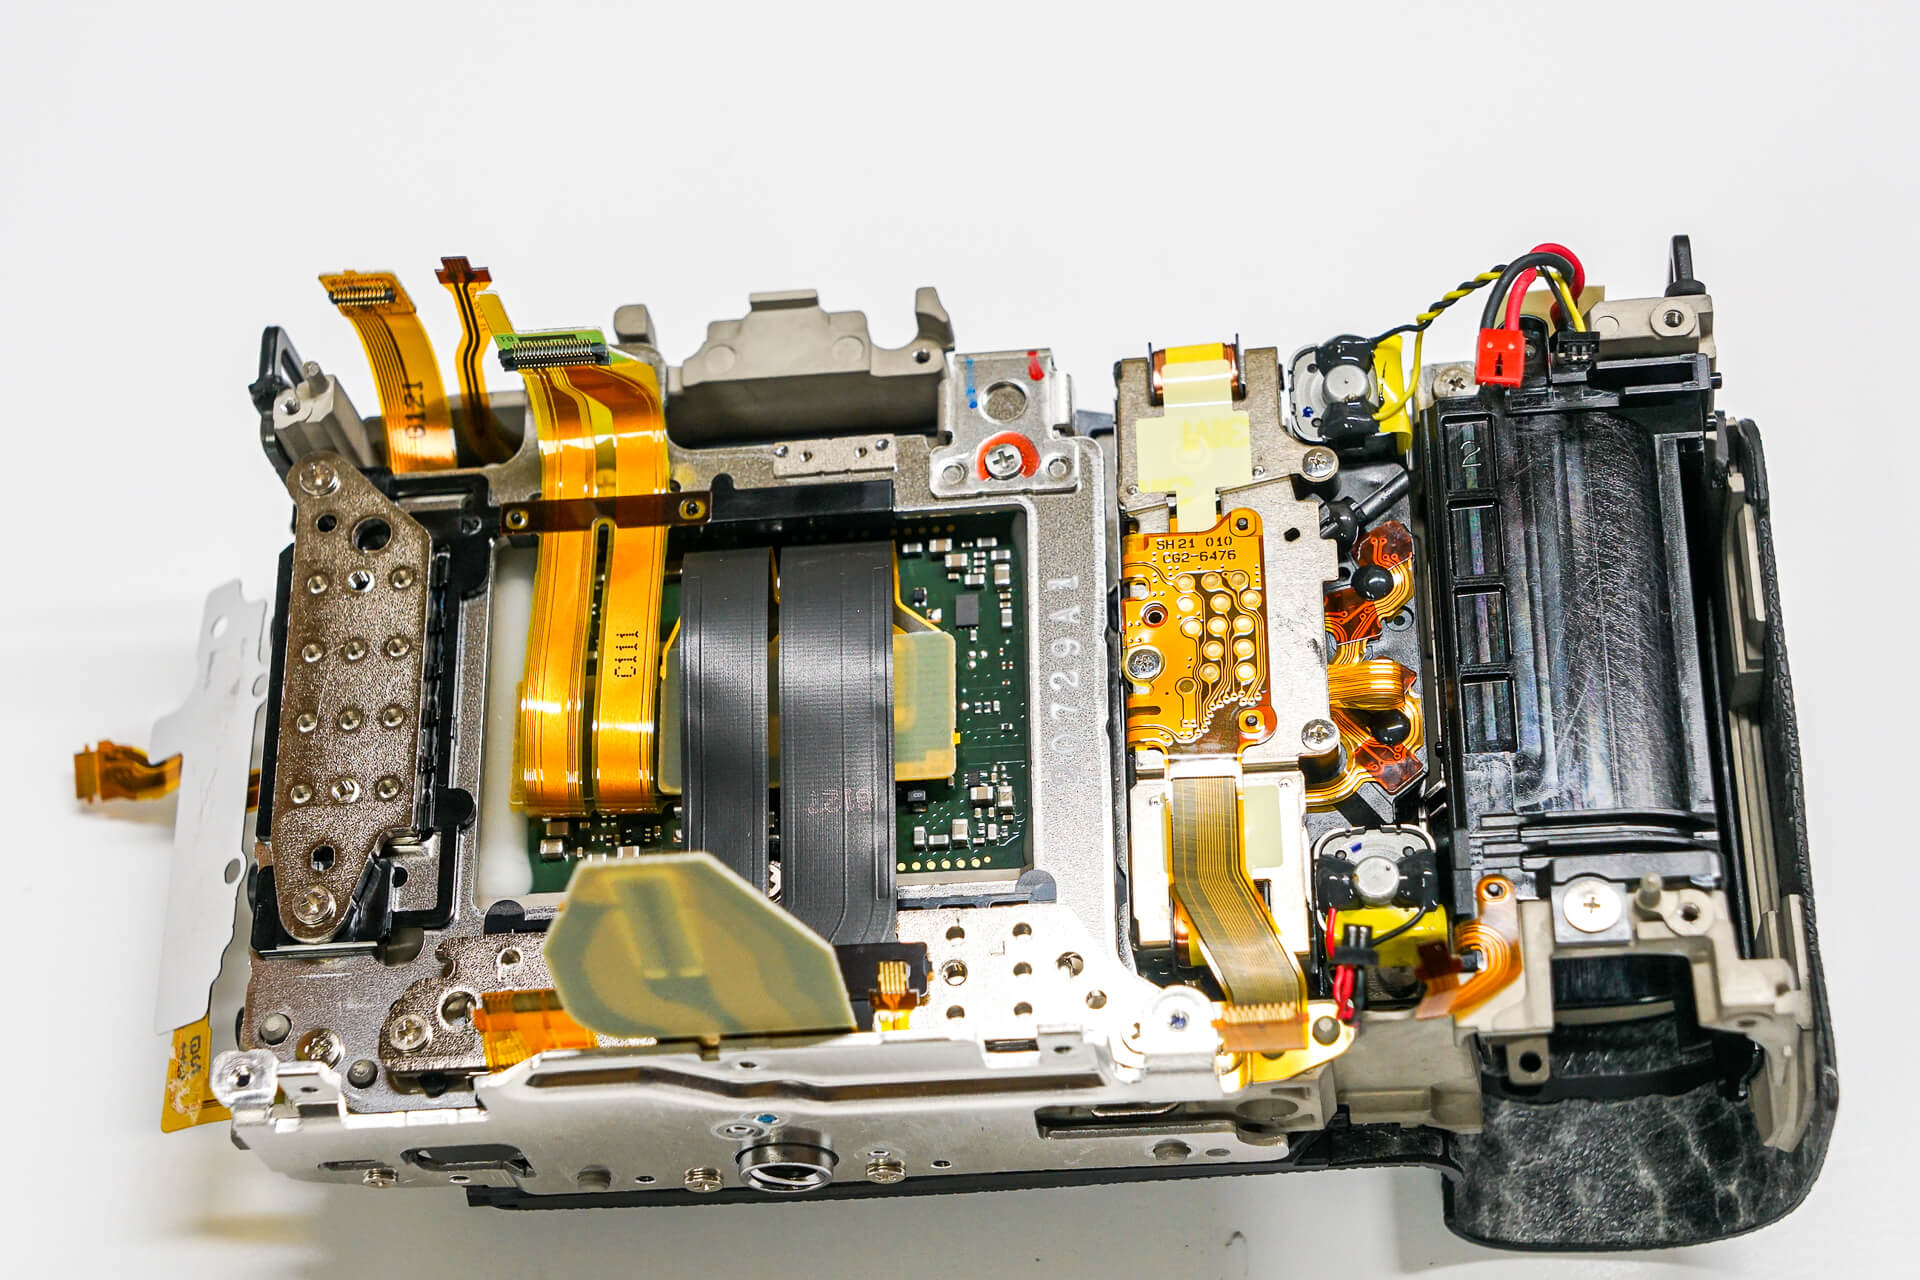 Cannon EOS R6 Disassembly and Teardown